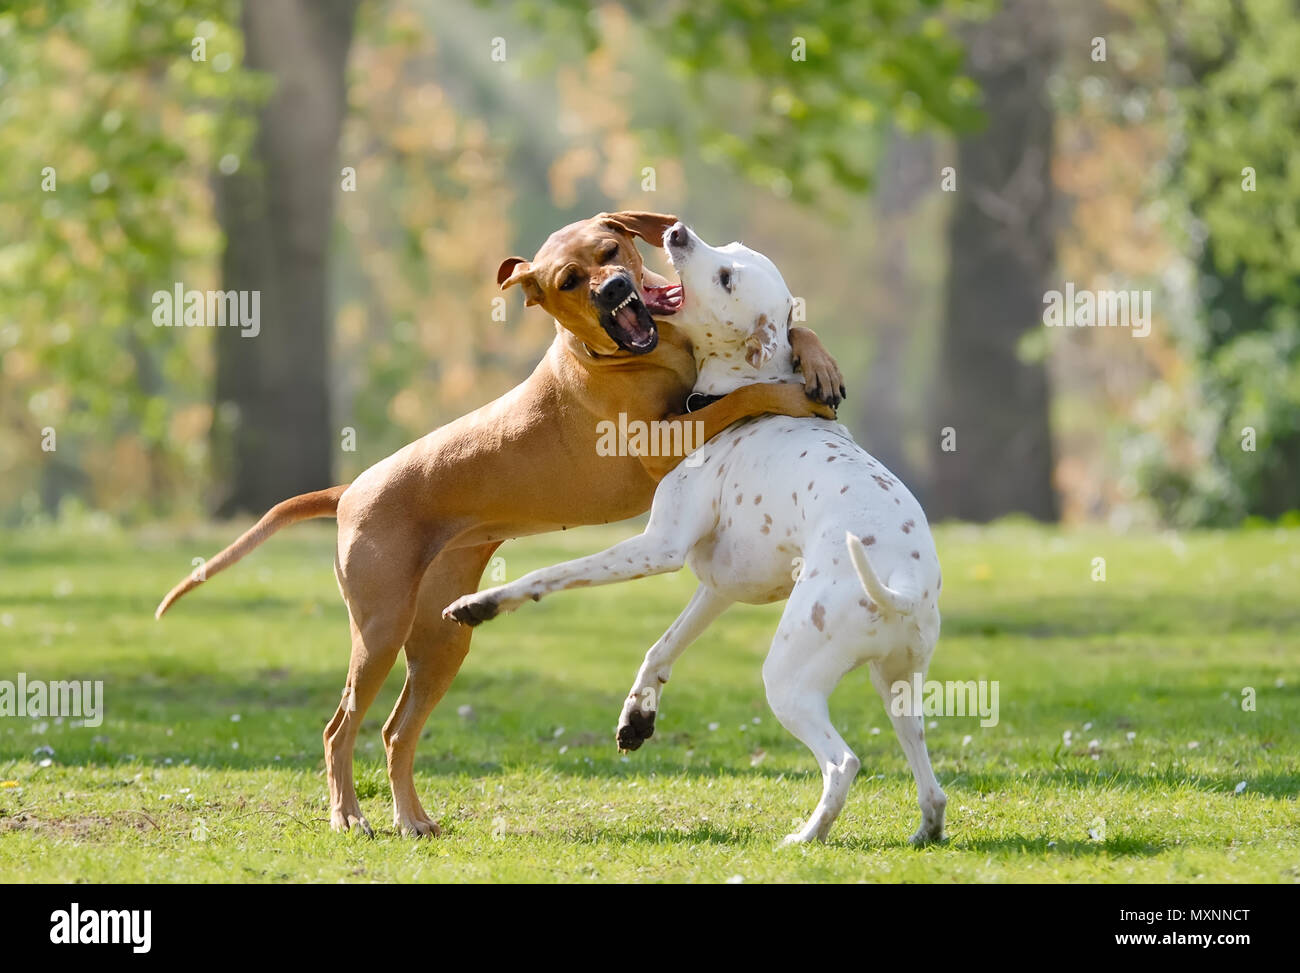 Two dogs, Rhodesian Ridgeback and Dalmatian (color lemon), playing together and romp about in a green grass meadow in spring Stock Photo